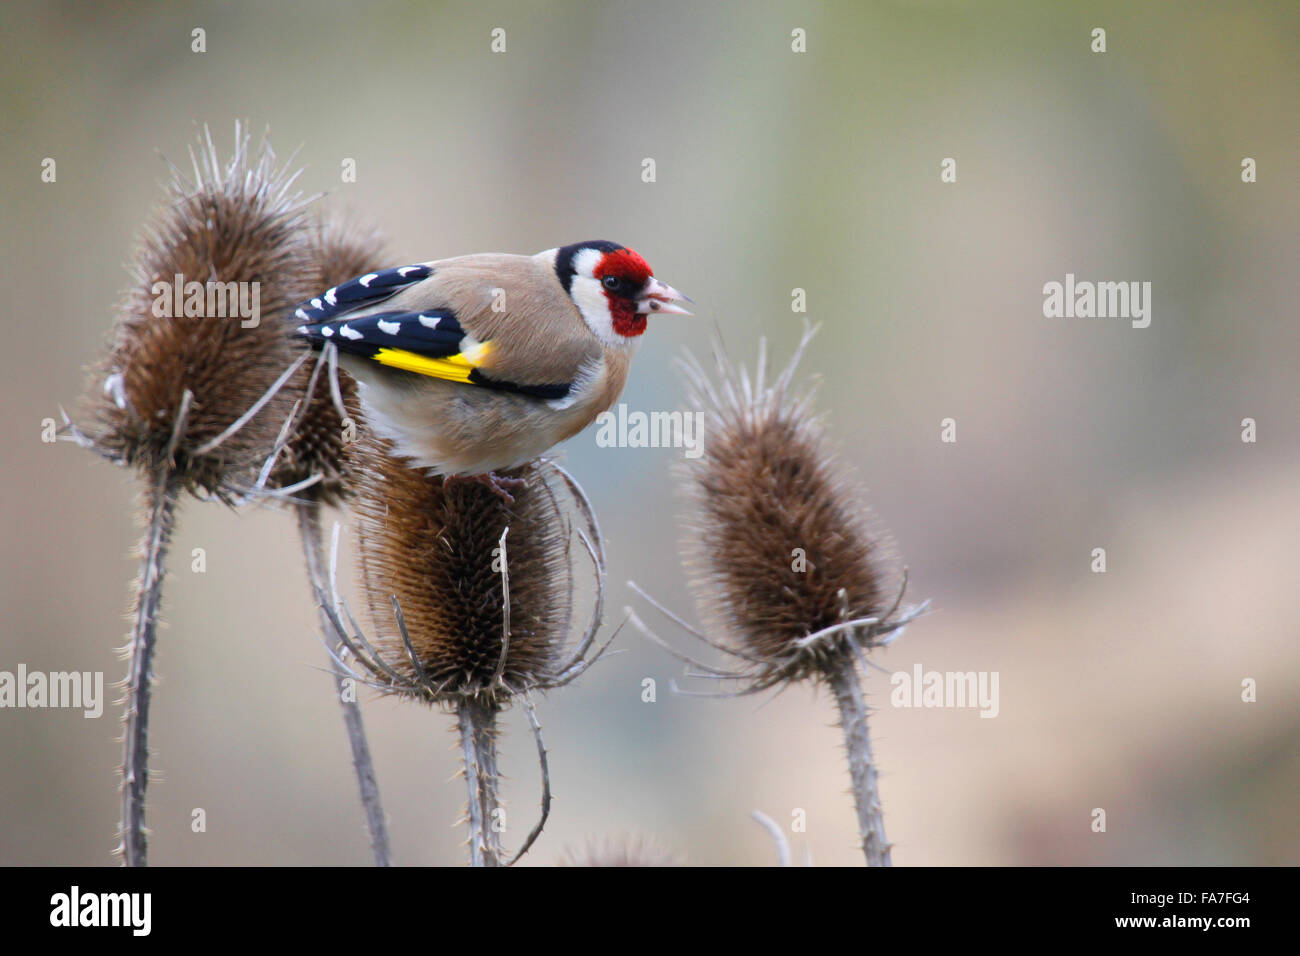 Goldfinch (Carduelis carduelis) at a silver thistle Stock Photo